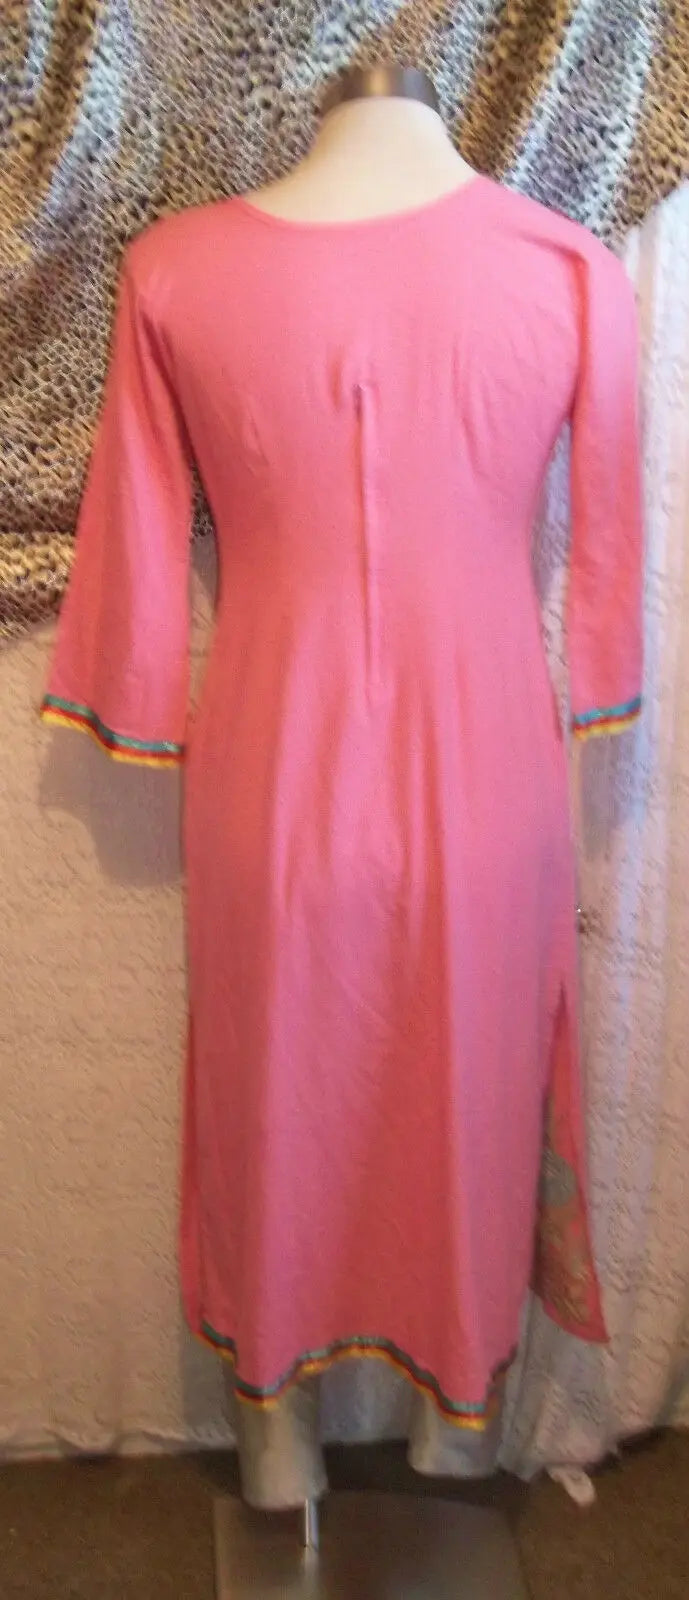 Pink Vintage Indian Tunic top.calf length,side splits, embroidered ruffle detail Wonkey Donkey Bazaar